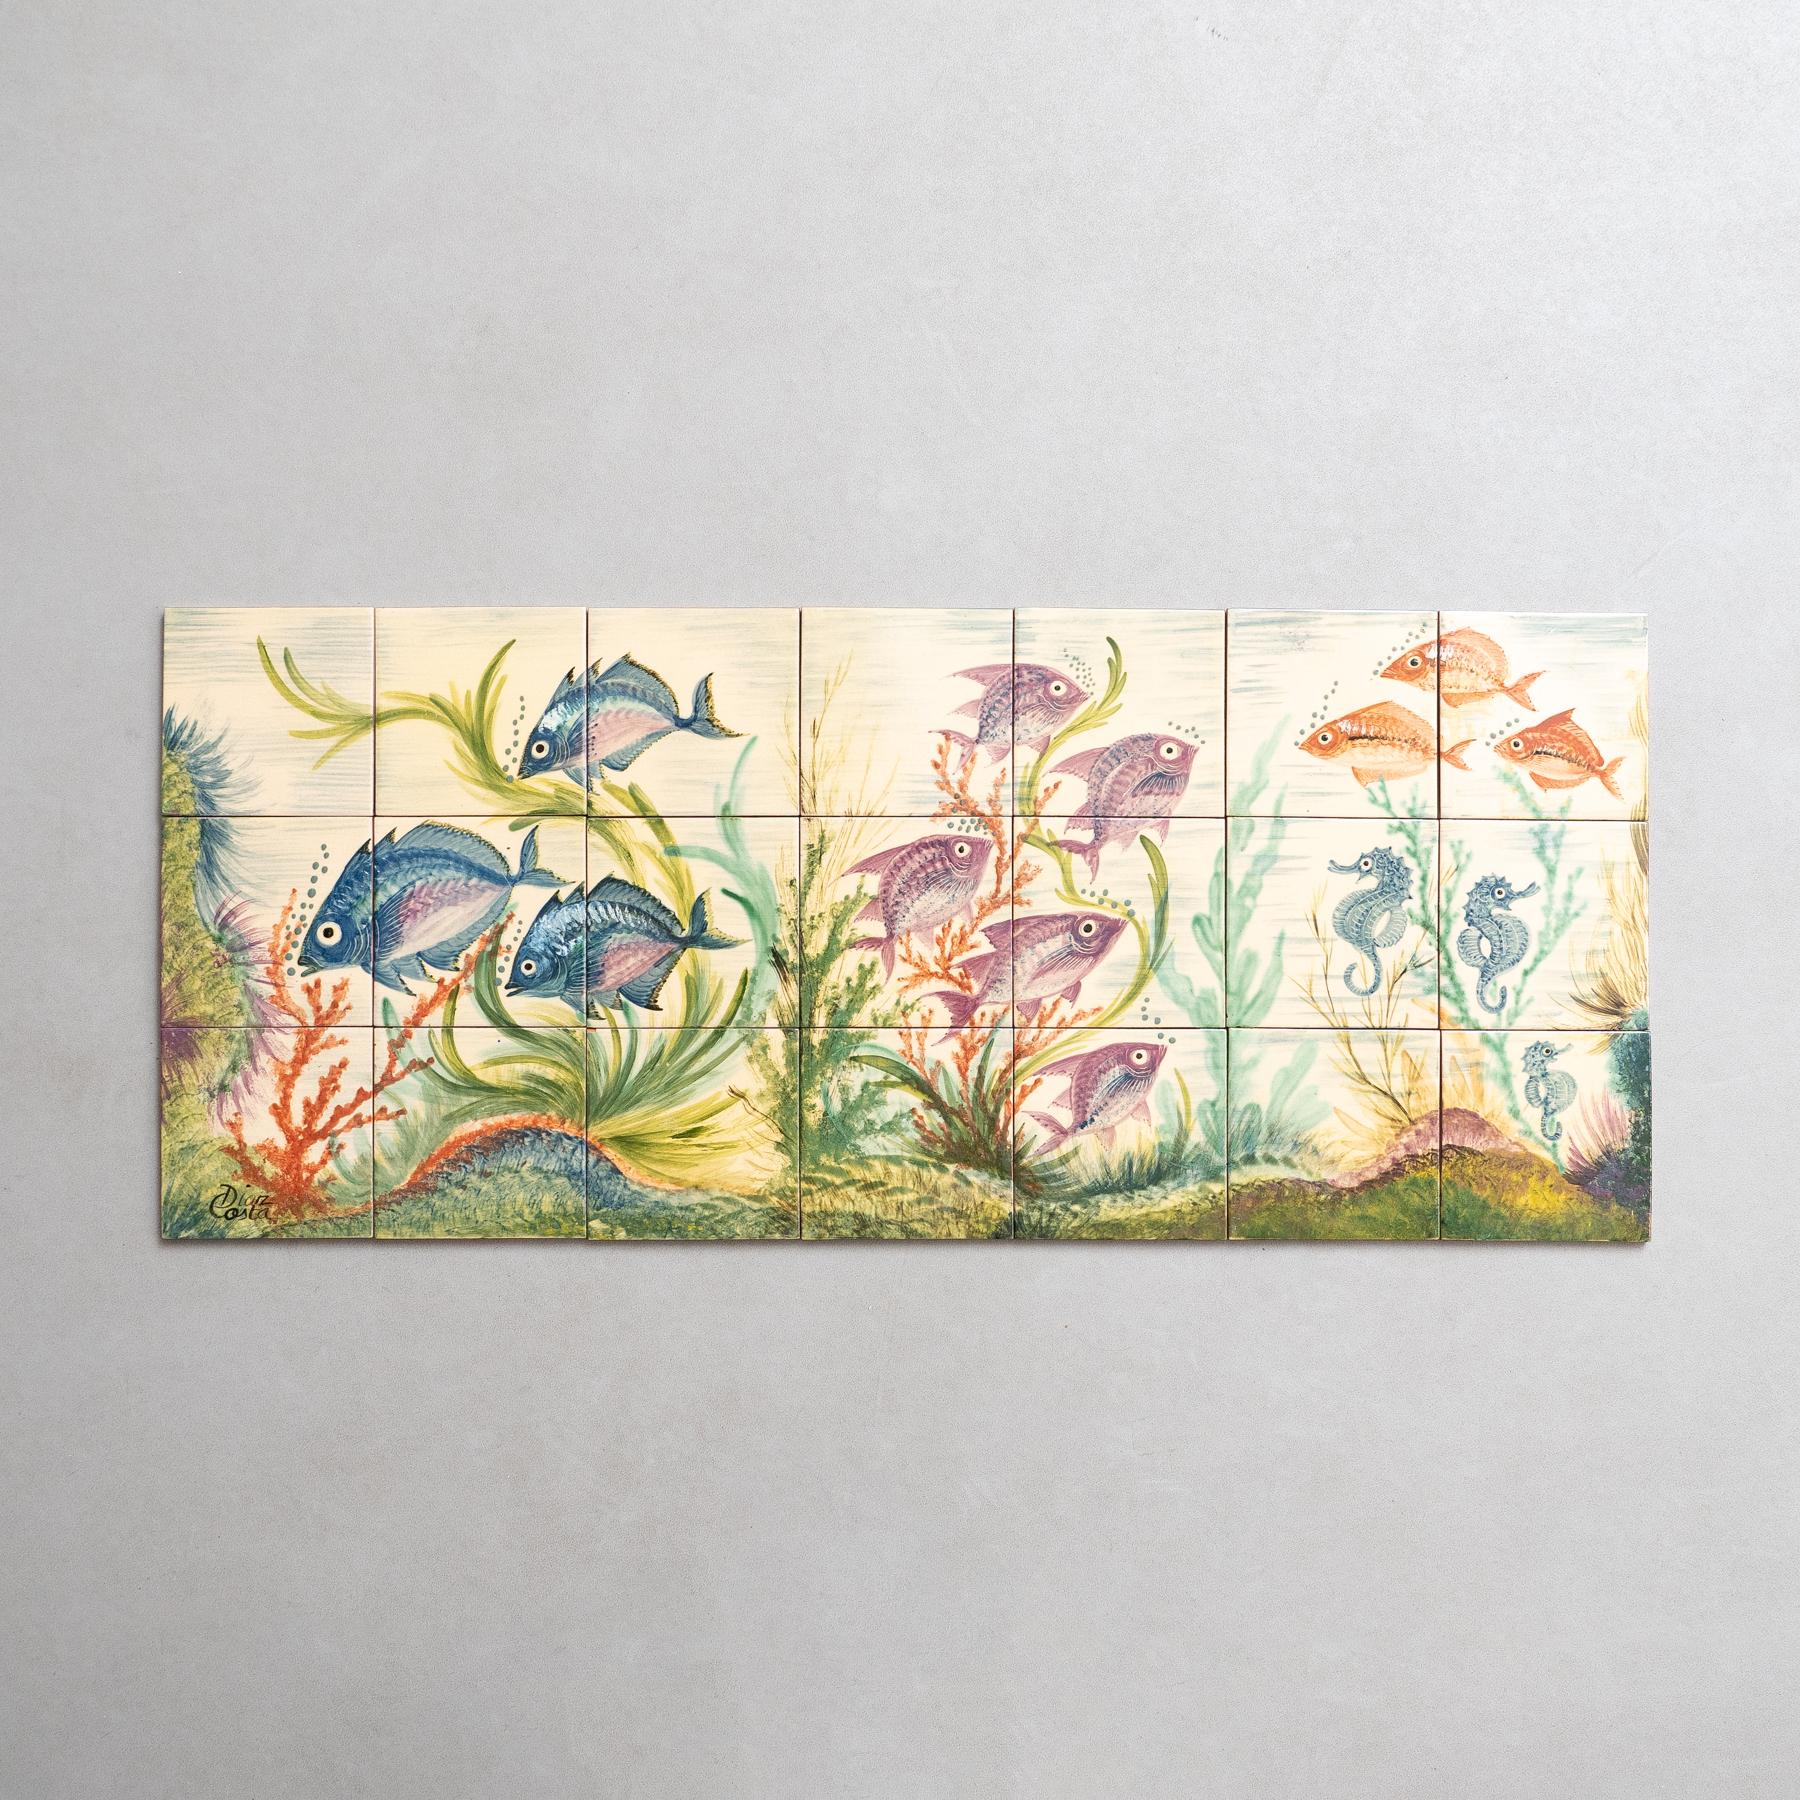 Dive into the mesmerizing world of Catalan artist Diaz Costa with this captivating ceramic hand-painted large artwork featuring a school of fishes, a masterpiece from around 1960. Adorned with the artist's signature, this exquisite piece is a